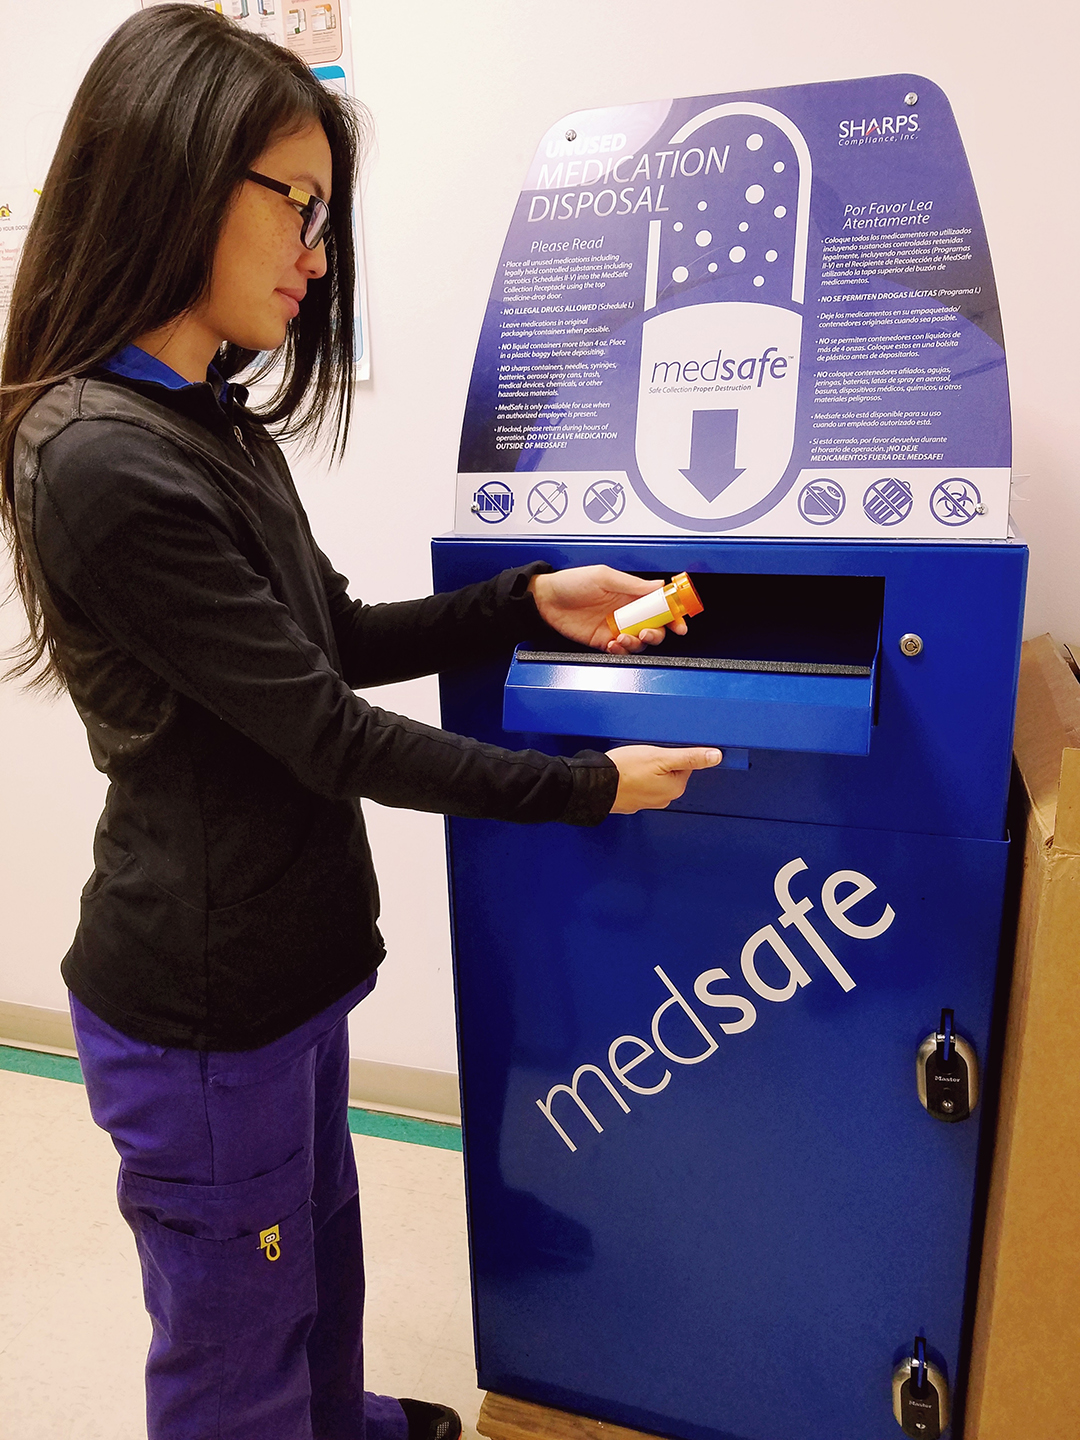 The medication disposal system at Belcourt IHS is user-friendly and environmentally safe.